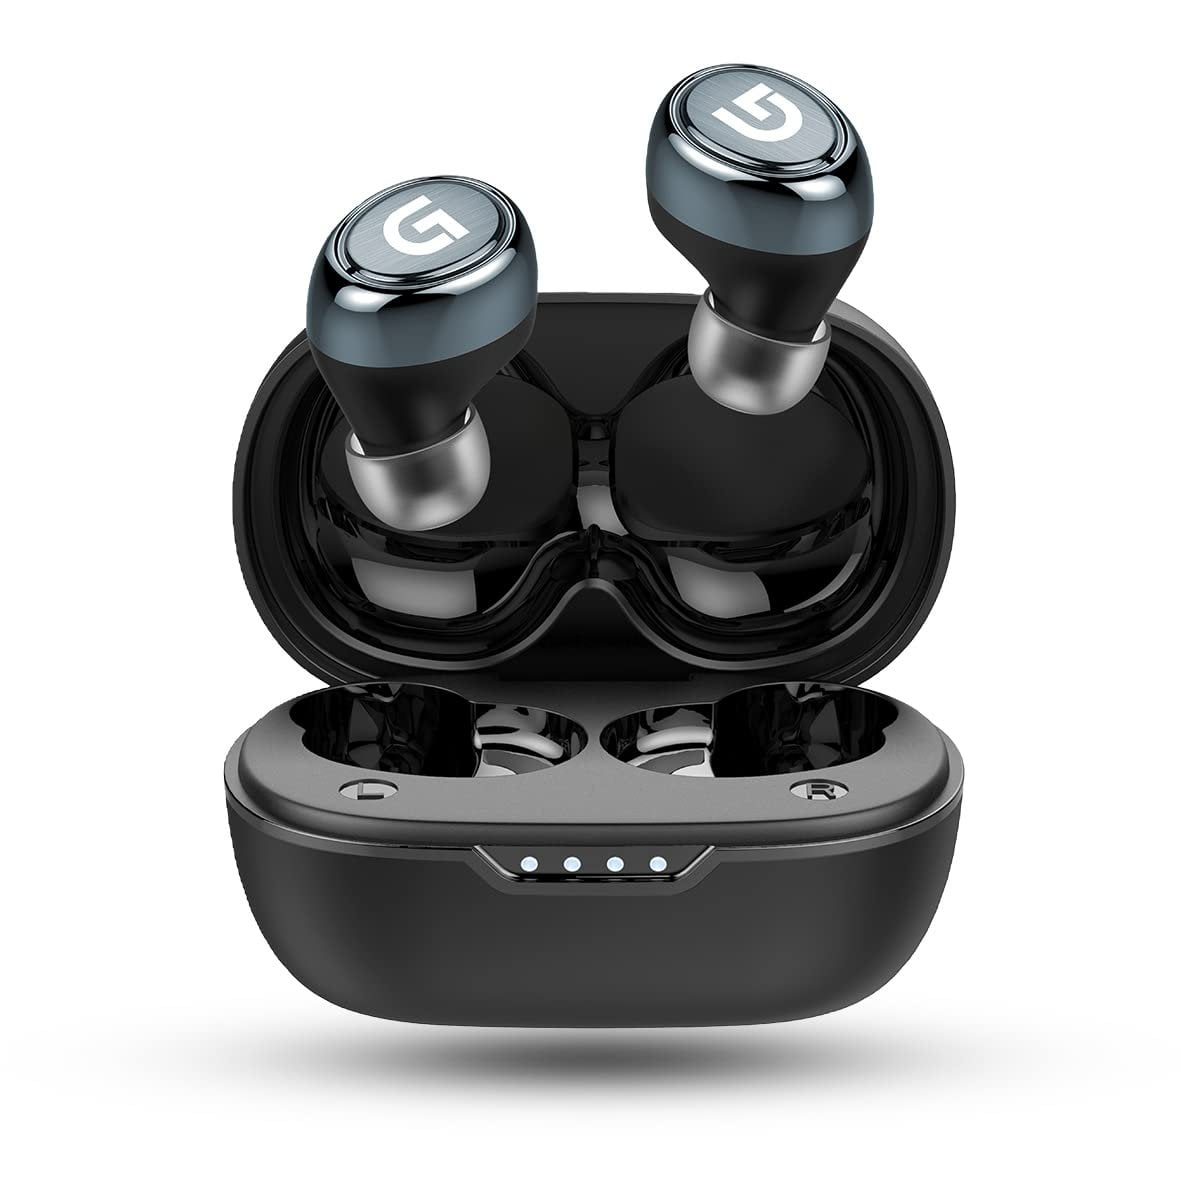 Gizmore TWS 804 Wireless Earbuds 1 Shop Mobile Accessories Online in India